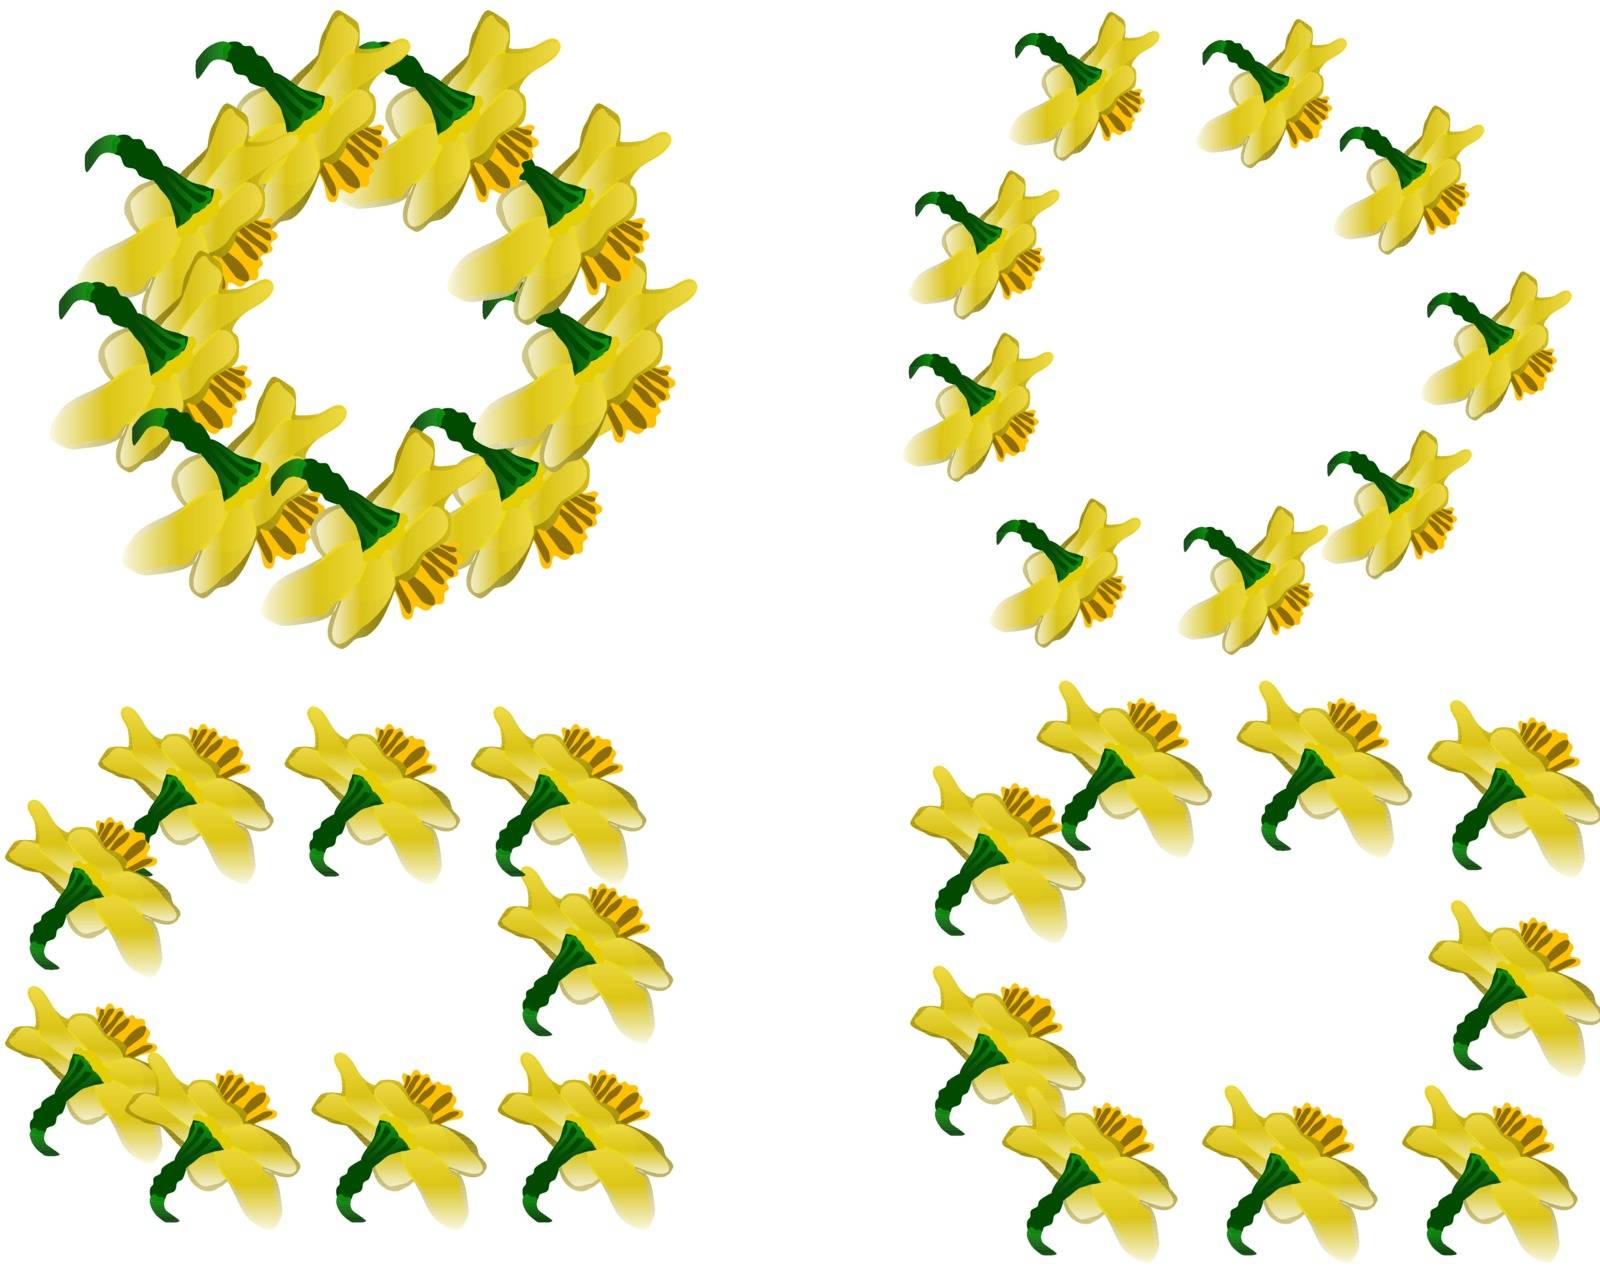 Floral motif banner. Spring frames template with daffodils isolated on white background. Vector illustration.